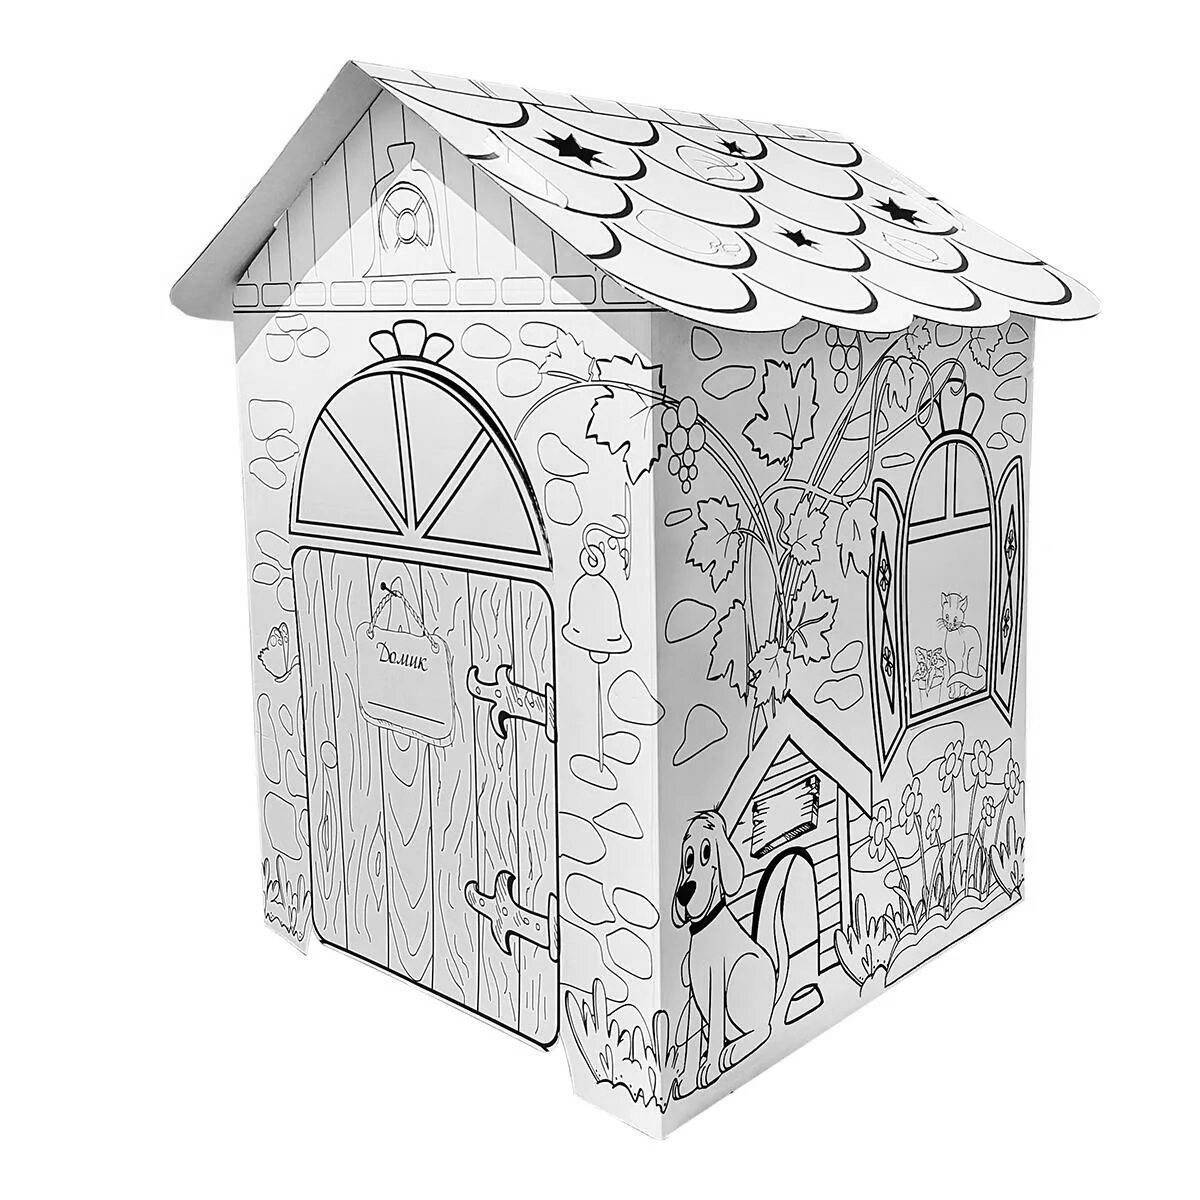 Coloring page cheerful ozone house